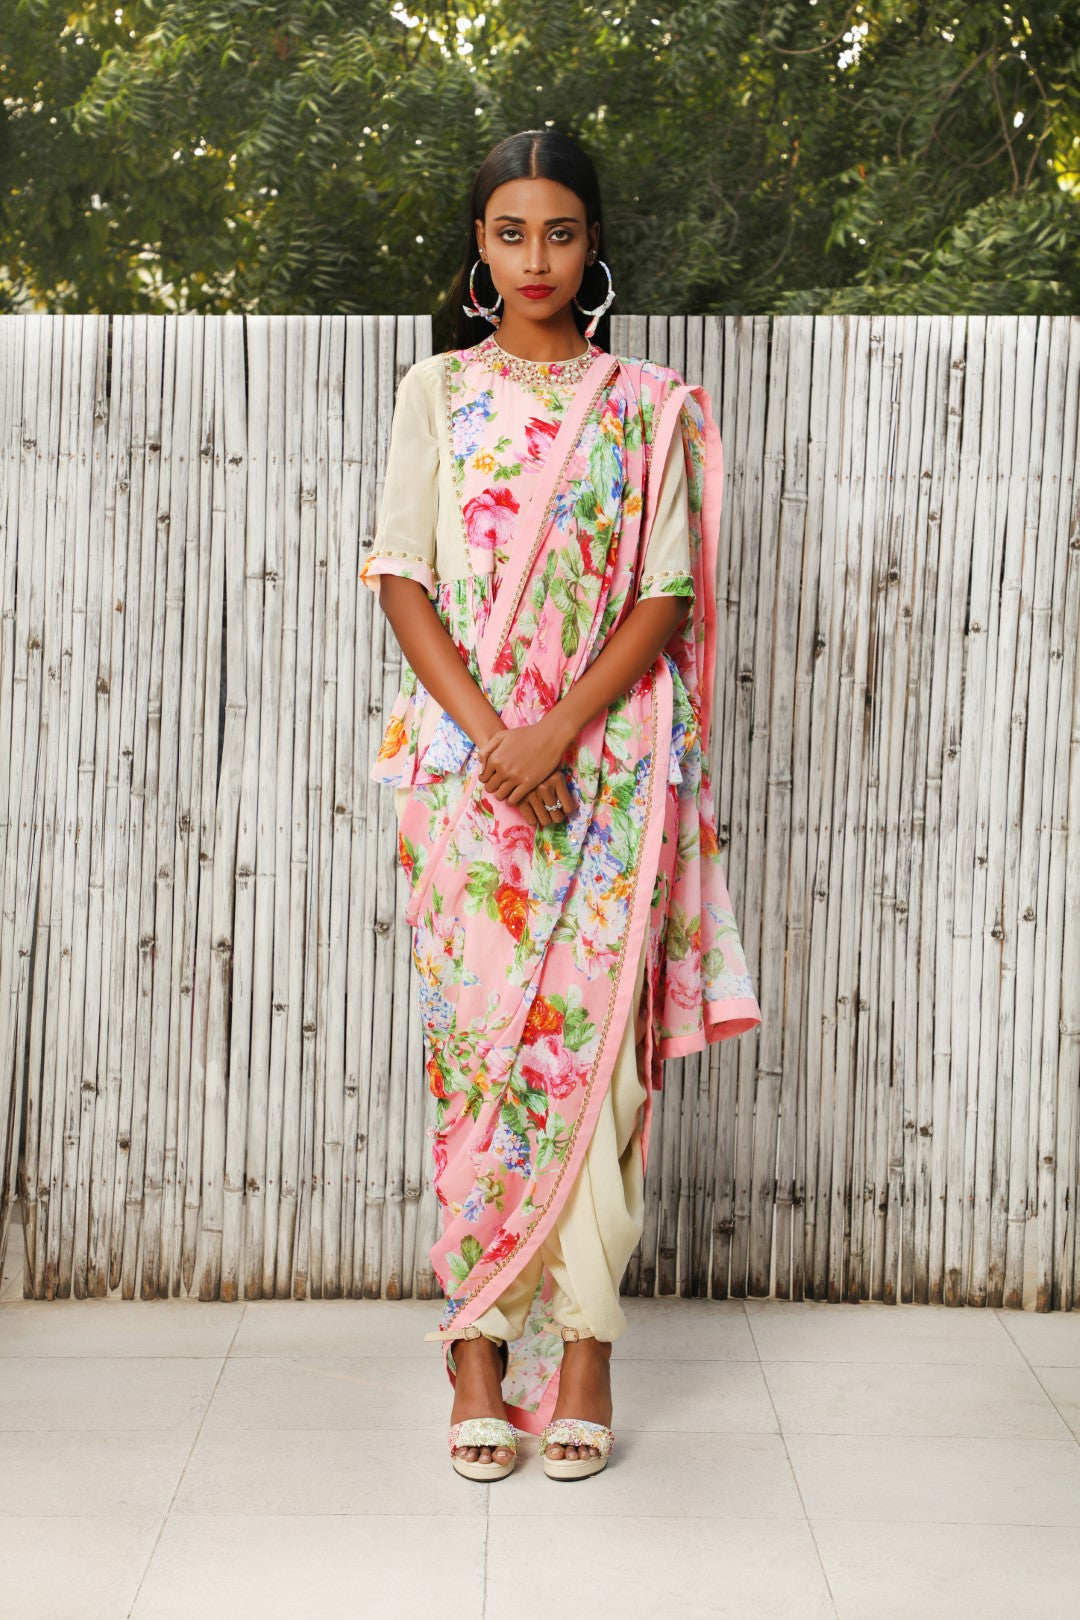 Antique jade georgette dhoti saree teamed with a soft pink VR panel top.